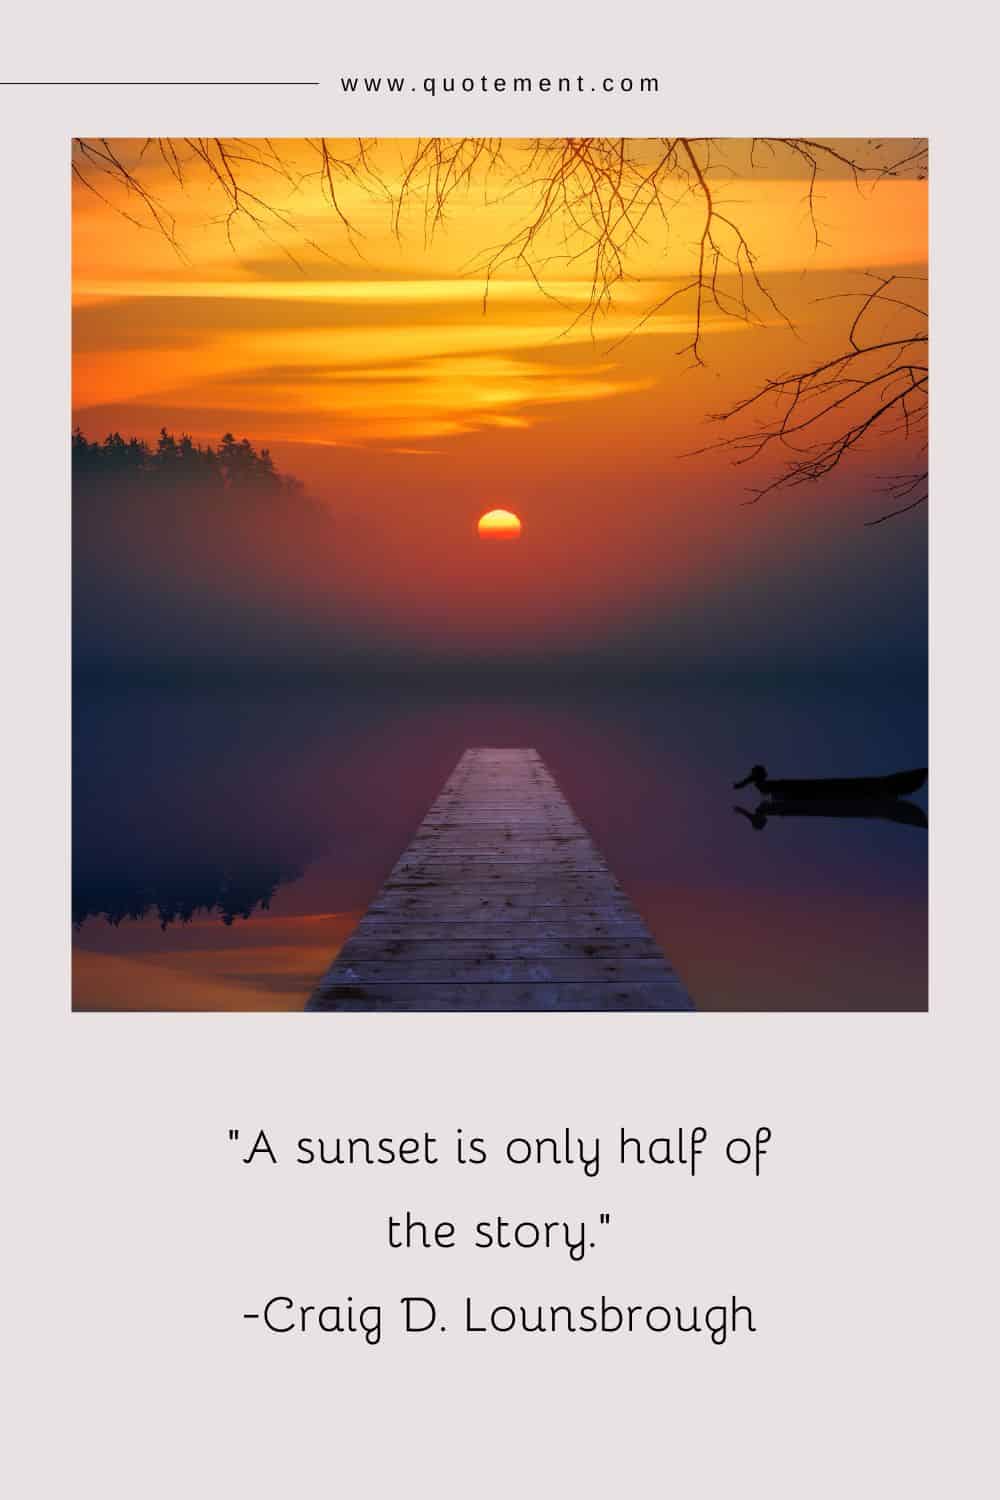 A sunset is only half of the story